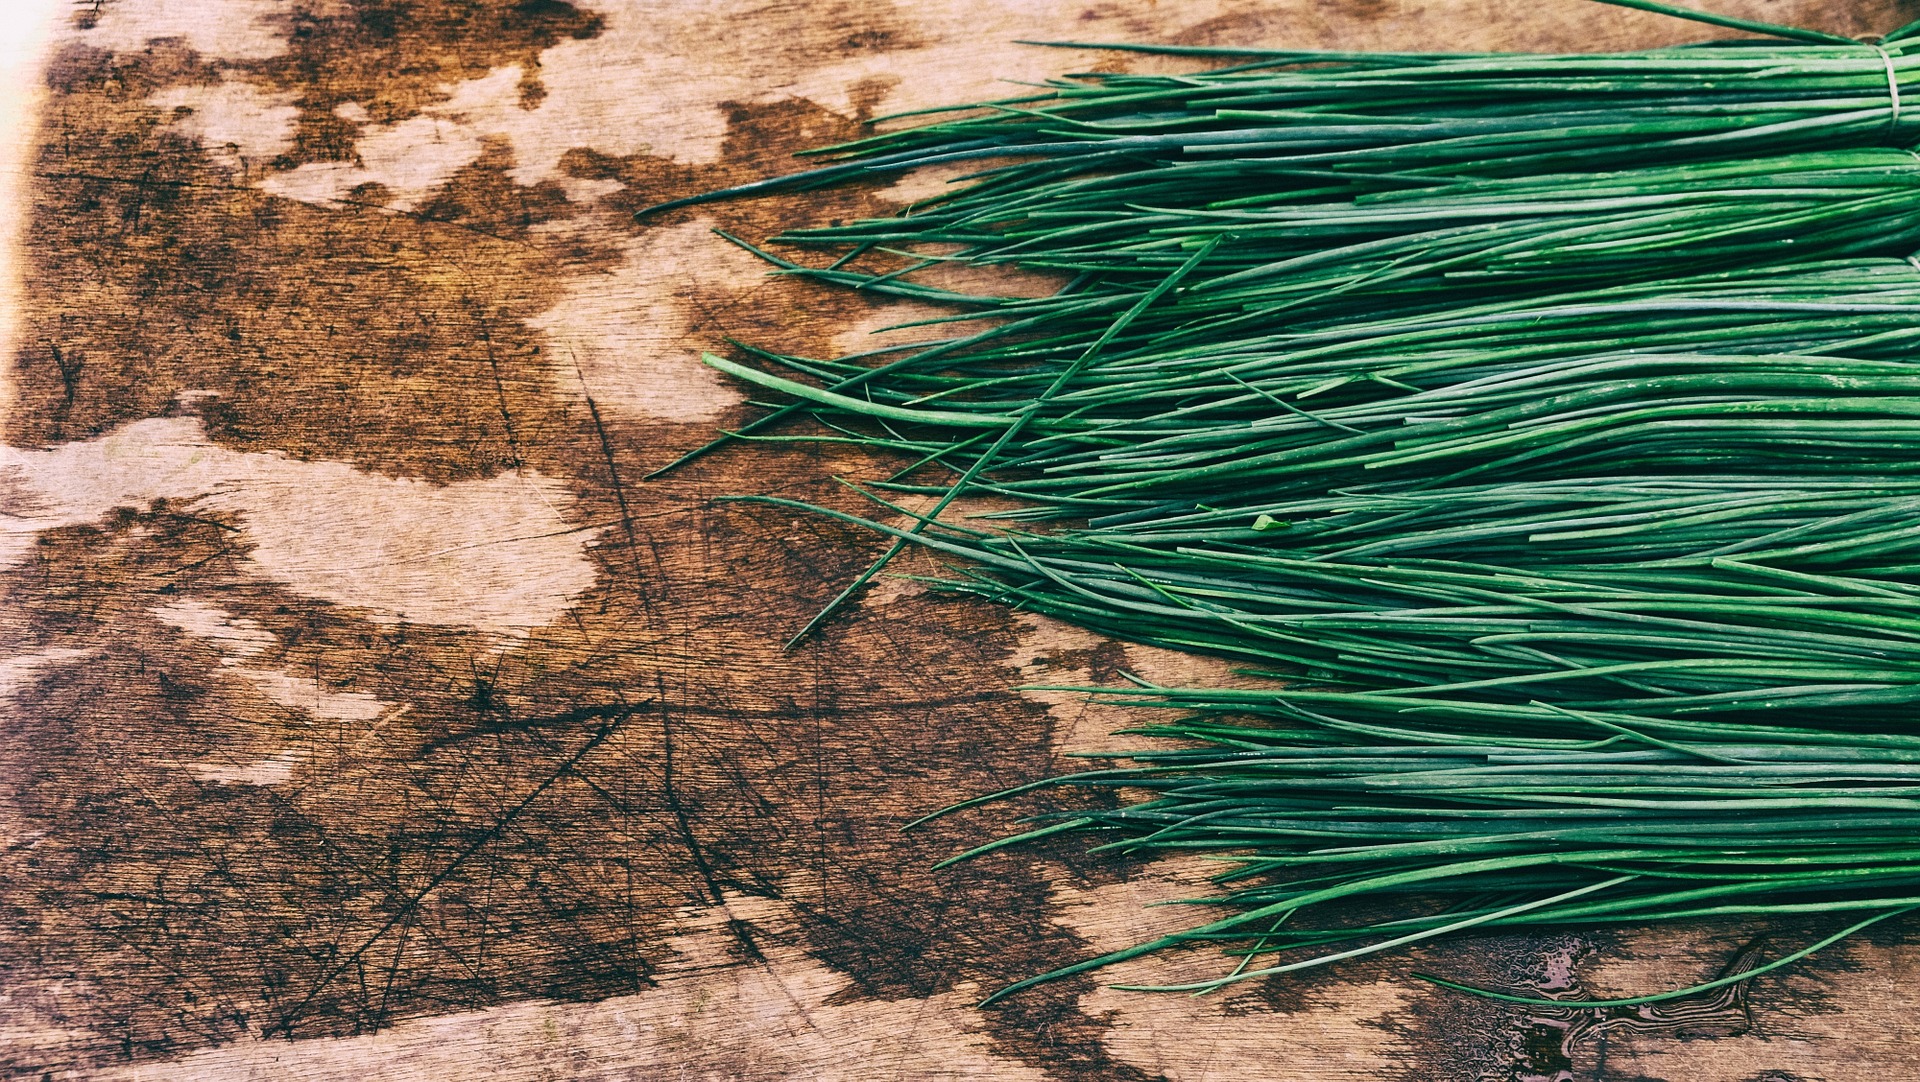 In Chinese, What Does It Mean to Cut Chives (harvest chives)?